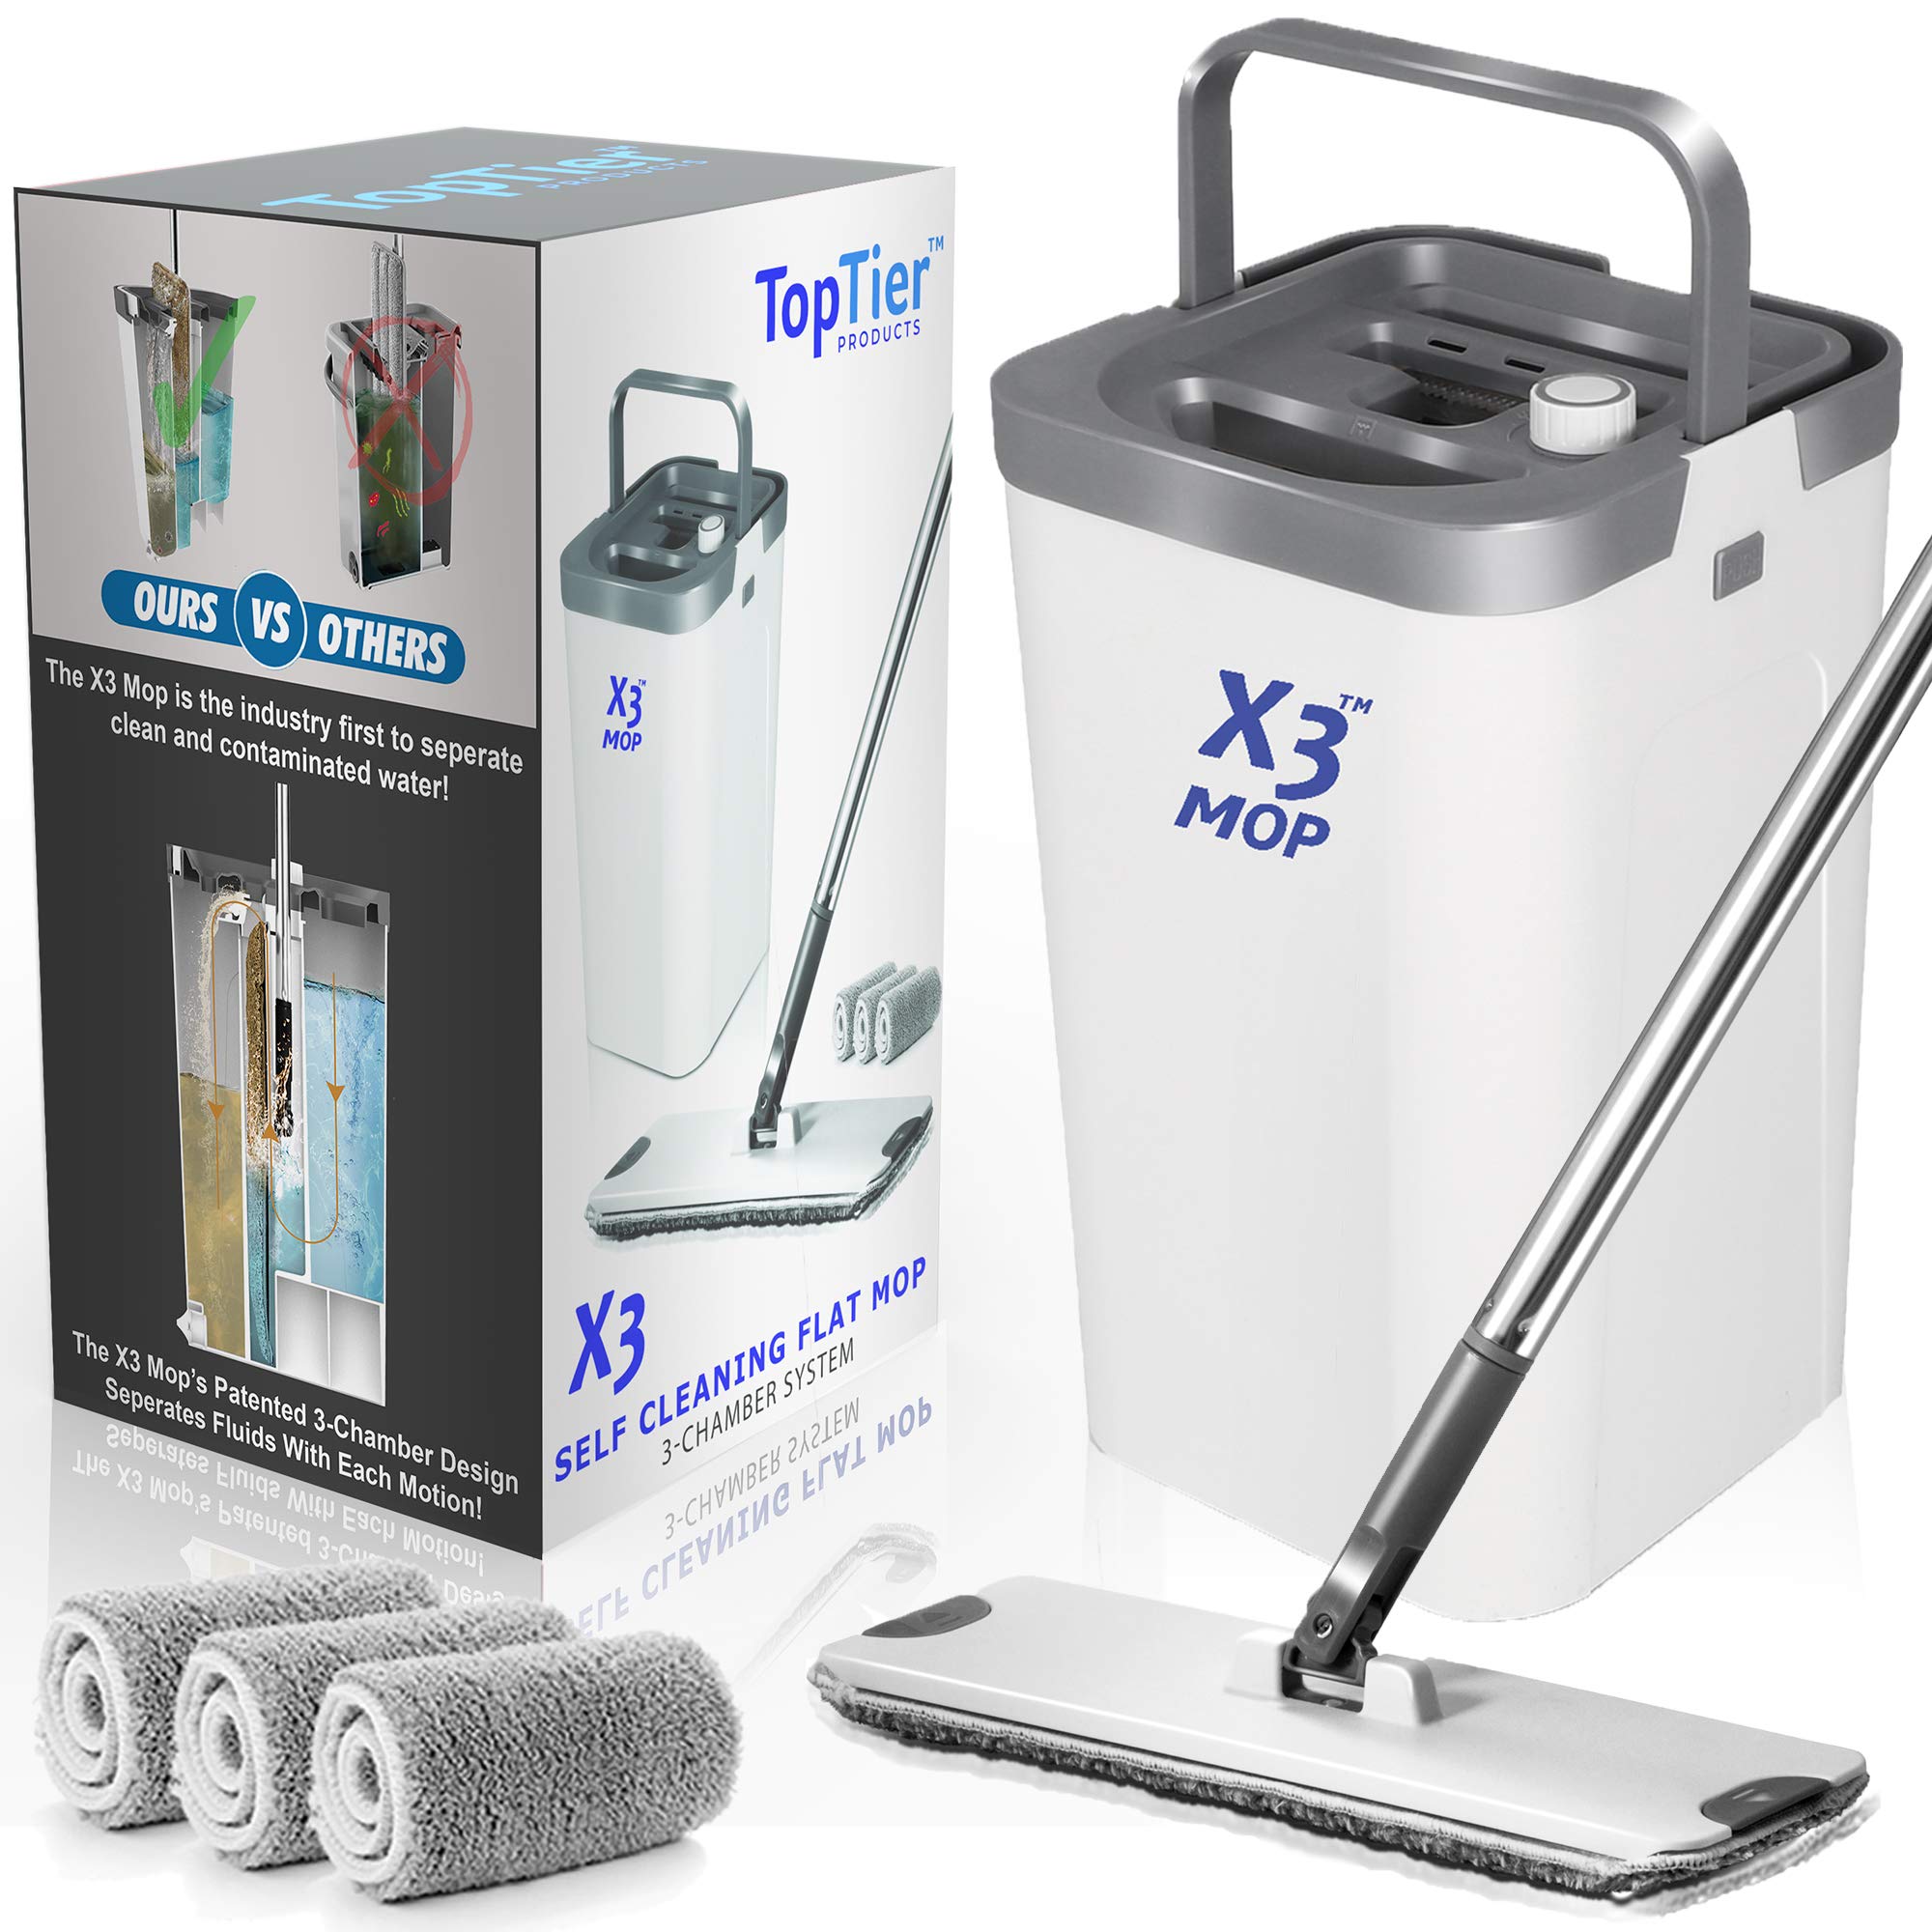 X3 Mop, Separates Dirty and Clean Water, 3-Chamber Design, Flat Mop and Bucket Set, Hands Free Home Floor Cleaning, 3 Reusable Microfiber Mop Pads Included